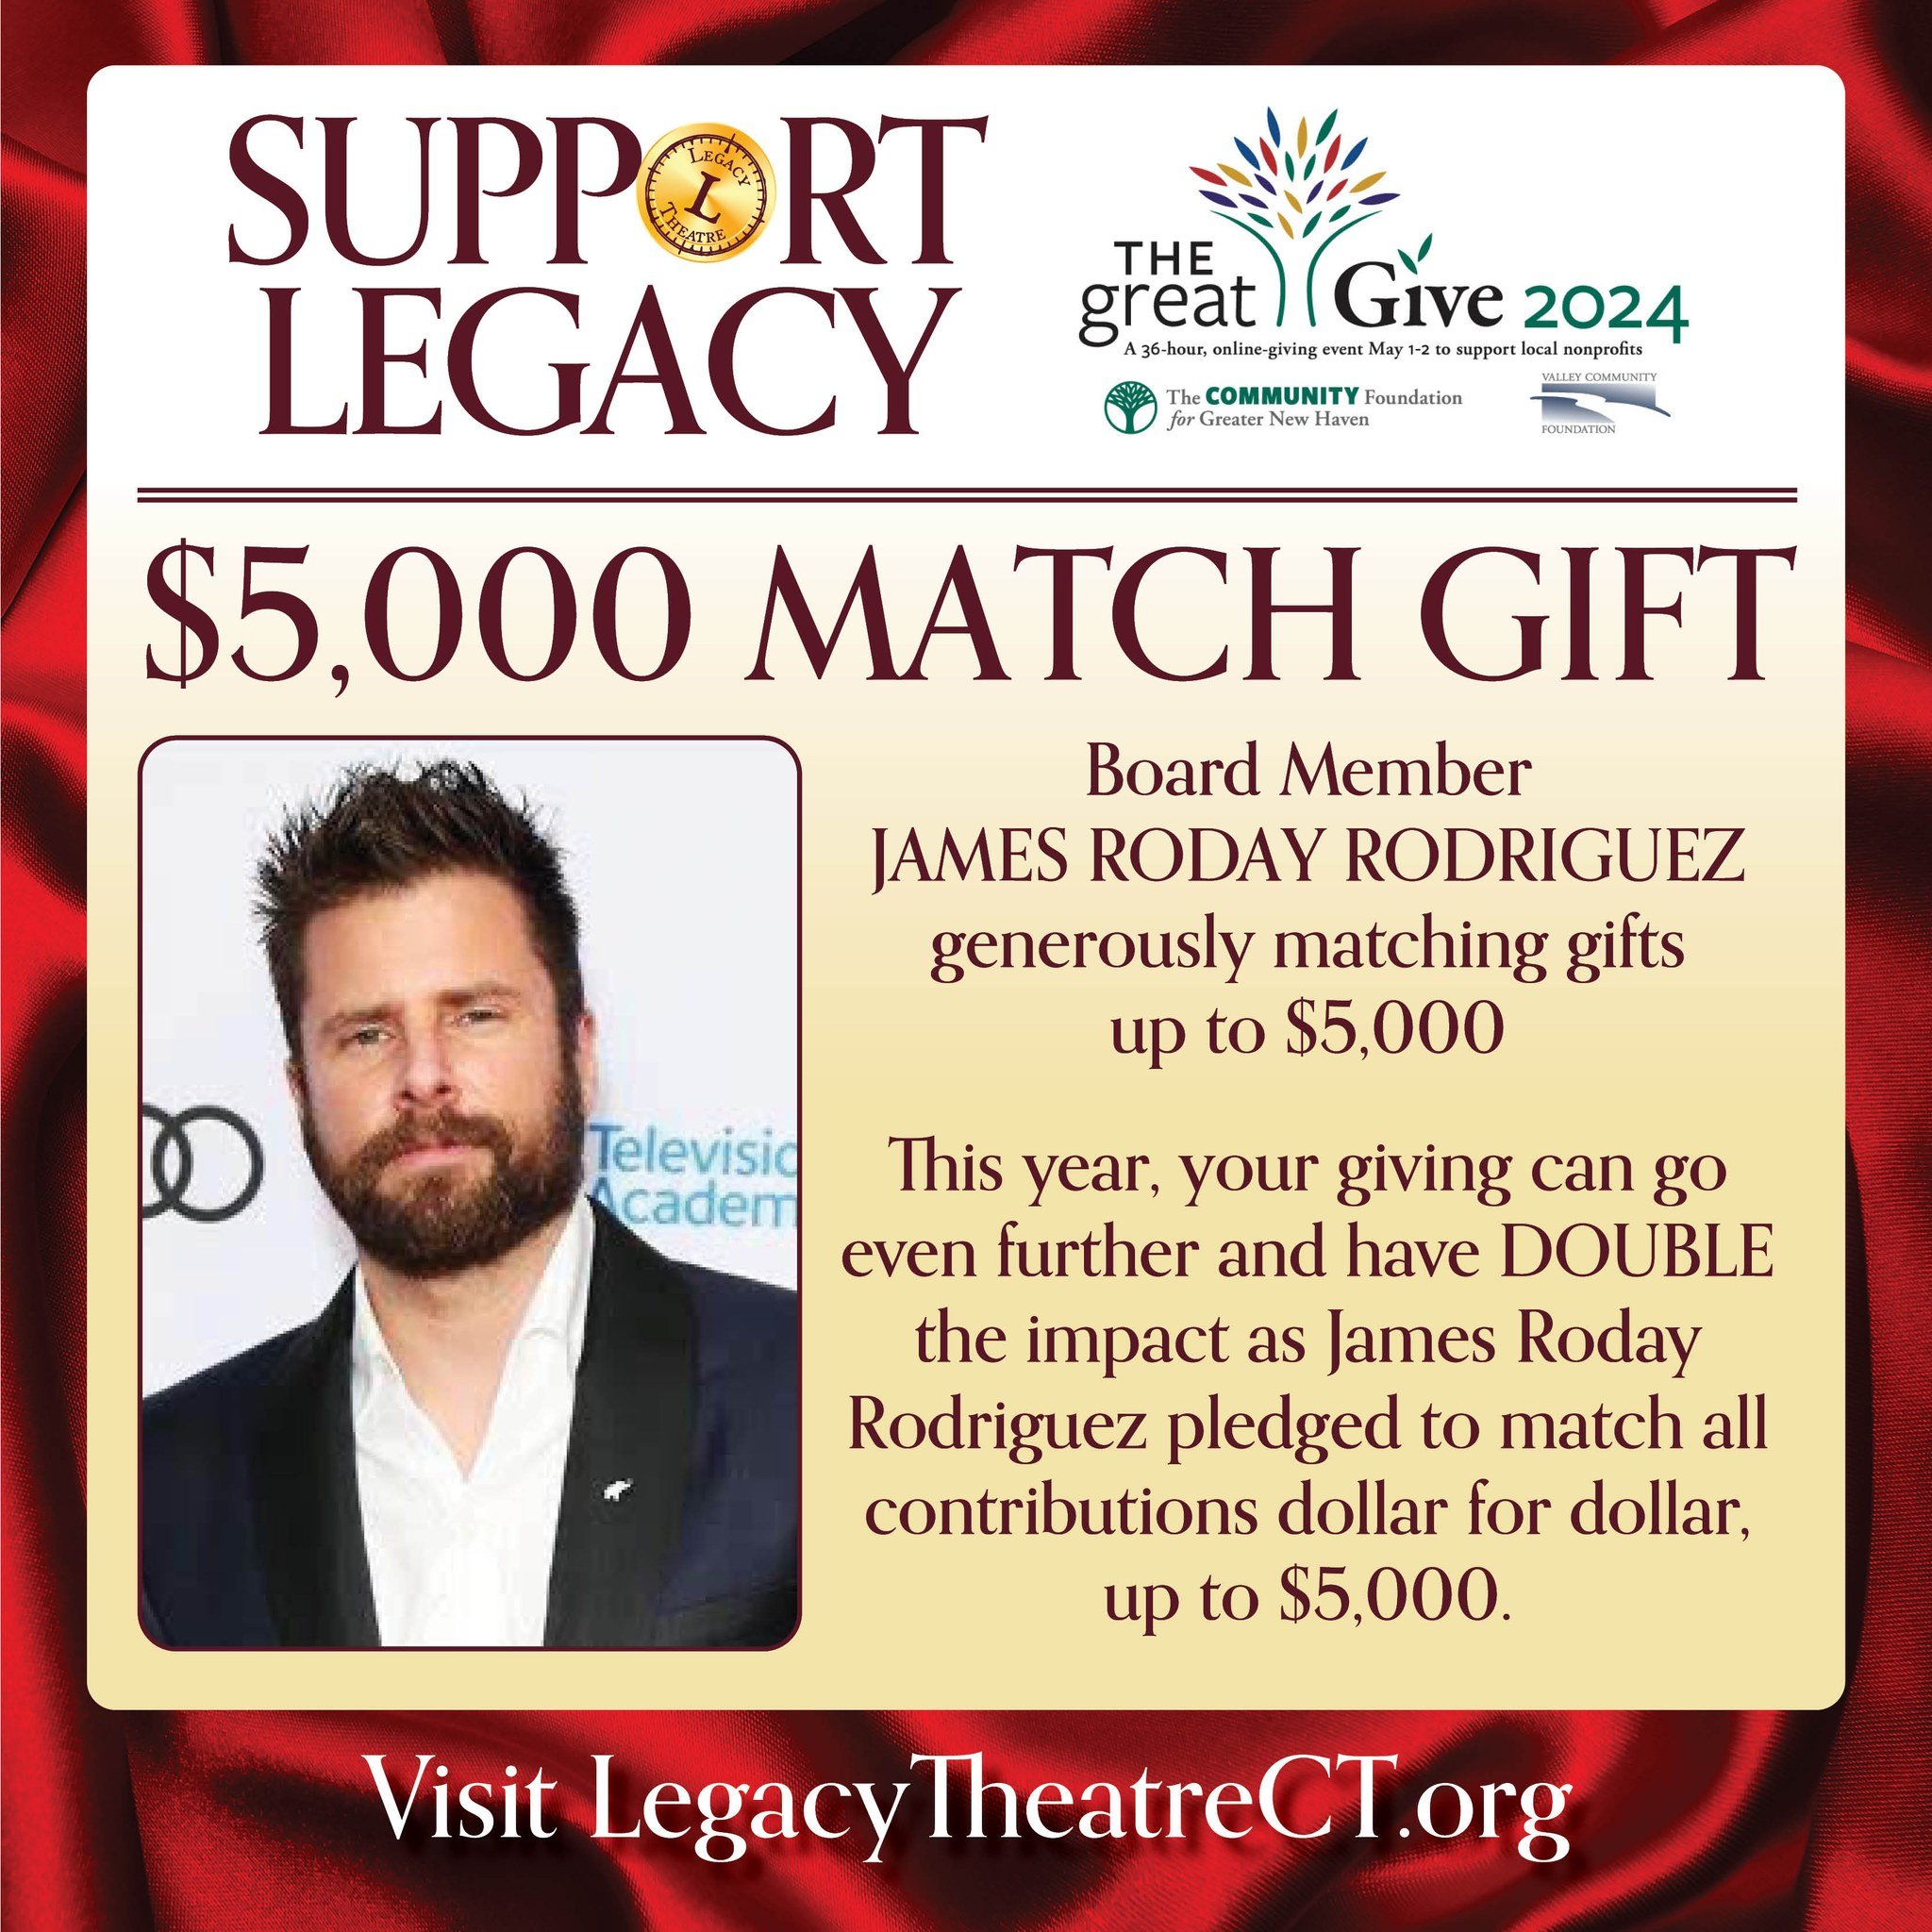 Today is the second (and final) day of The Great Give! Our Board Member, James Roday Rodriguez, is generously matching gifts up to $5,000. Double your impact and give now! 

https://www.legacytheatrect.org/greatgive 

#legacytheatrect #thegreatgive #